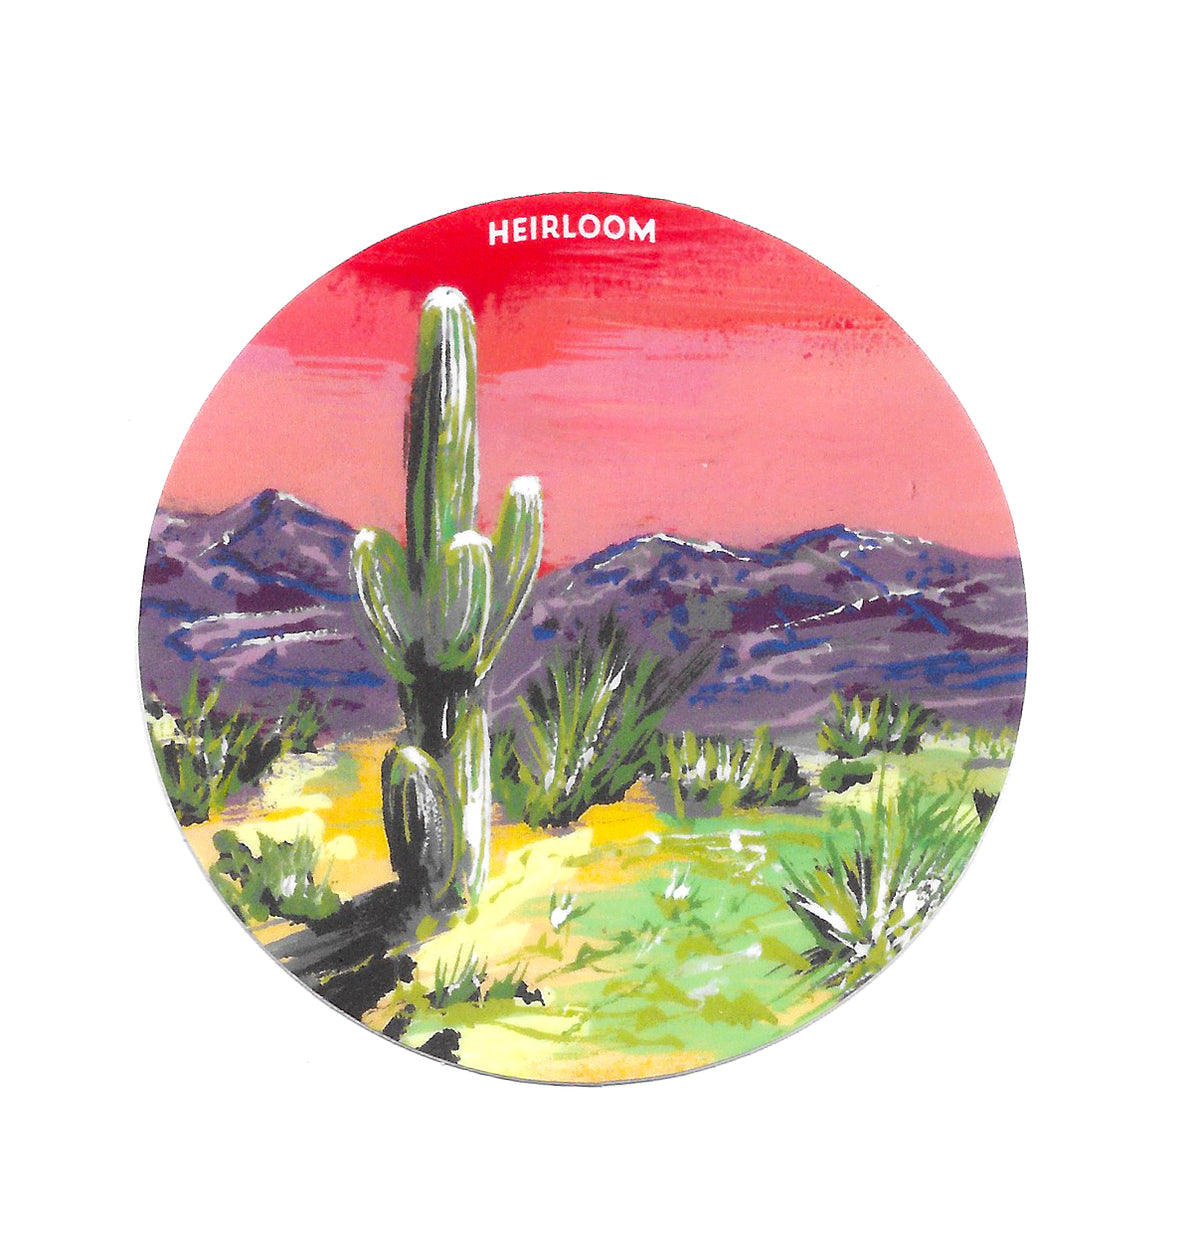 A circle sticker with a pink background and purple mountains with a sand and cactus in the foreground and a large saguaro taking up most of the space as the focus.